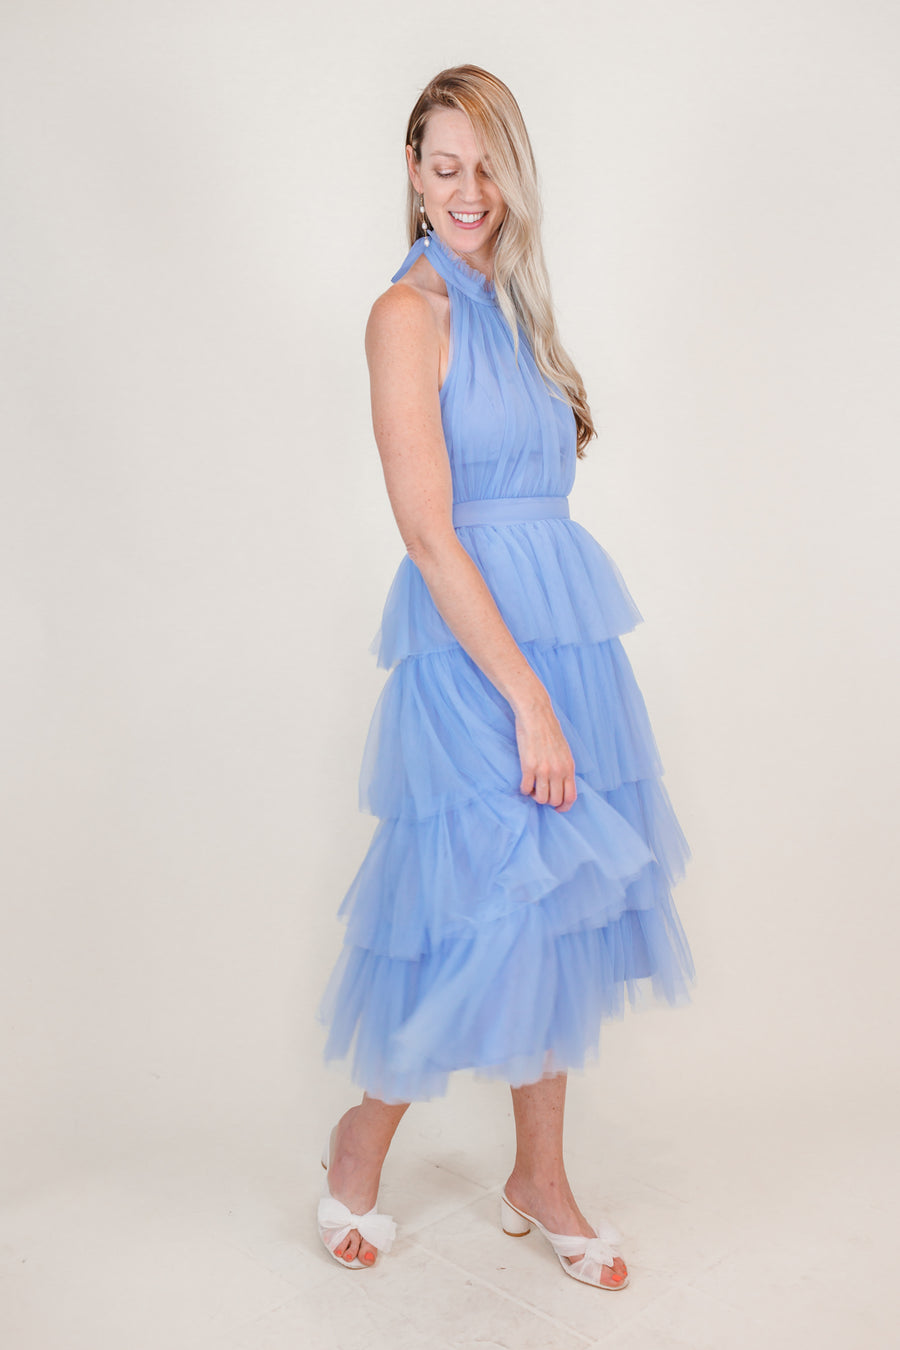 Lou Tulle Halter Tiered Blue Dress